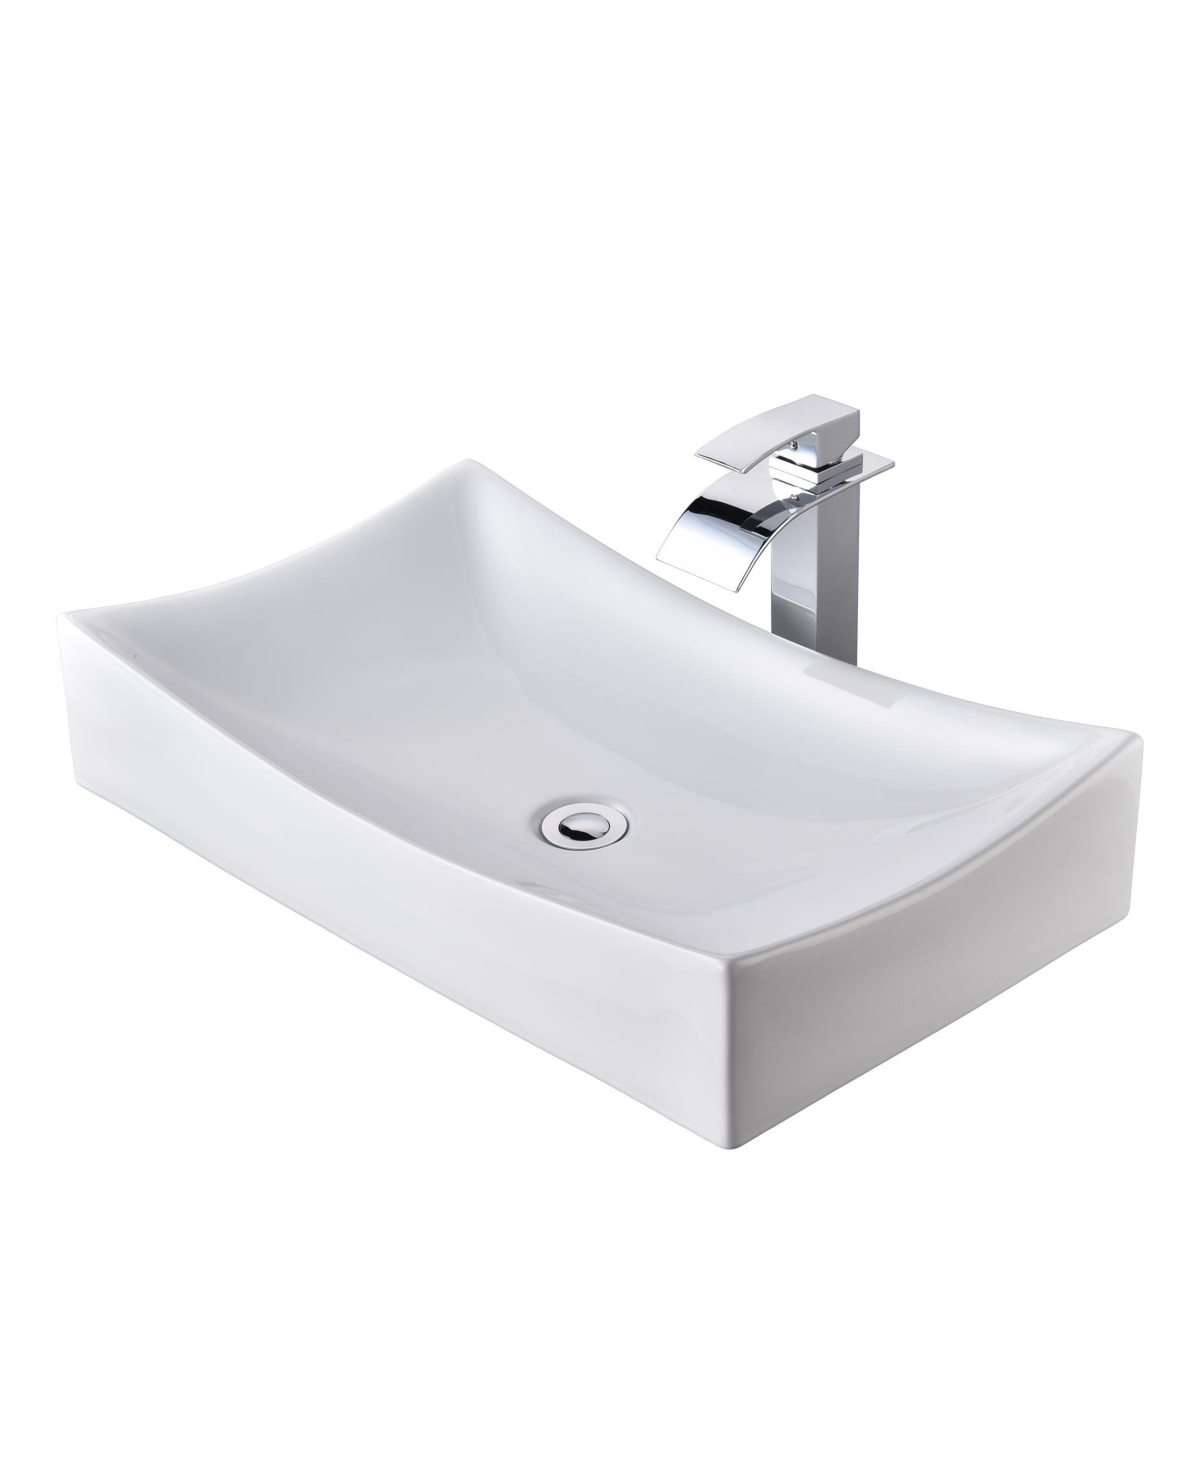 Above Counter Vessel Sink 1 Hole Waterfall Faucet Drain Chr Bathroom - Natural